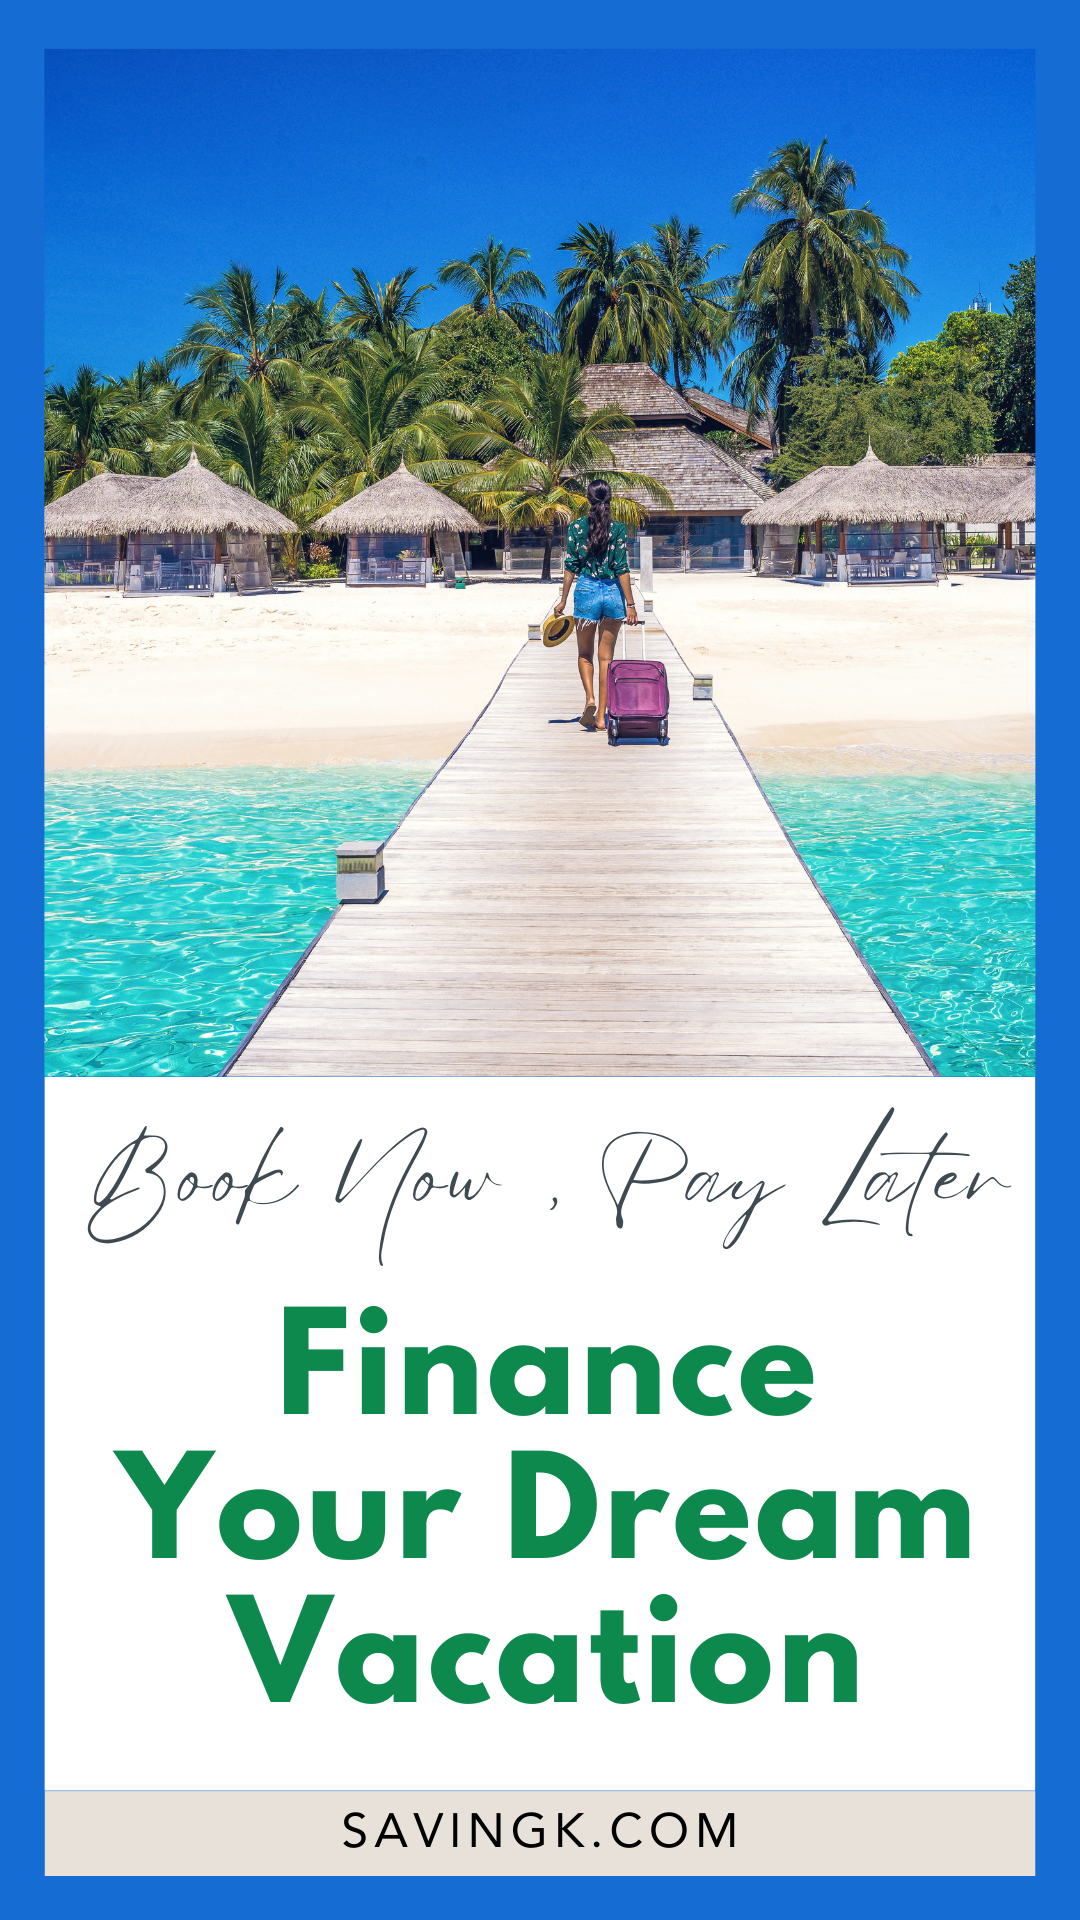 Finance Your Dream Vacation With Uplift Travel Loans